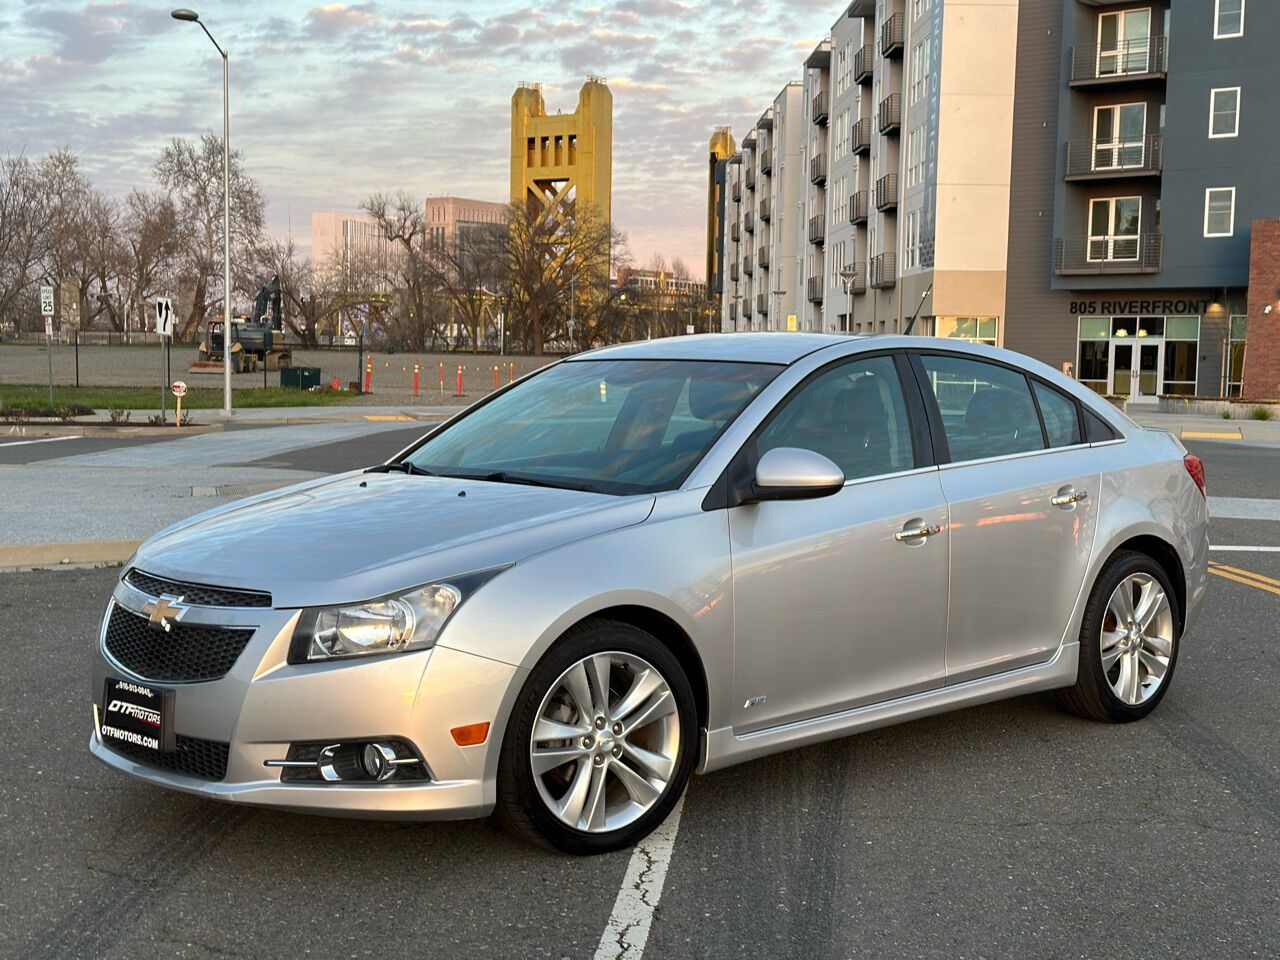 Used Chevrolet Cruze for Sale Online